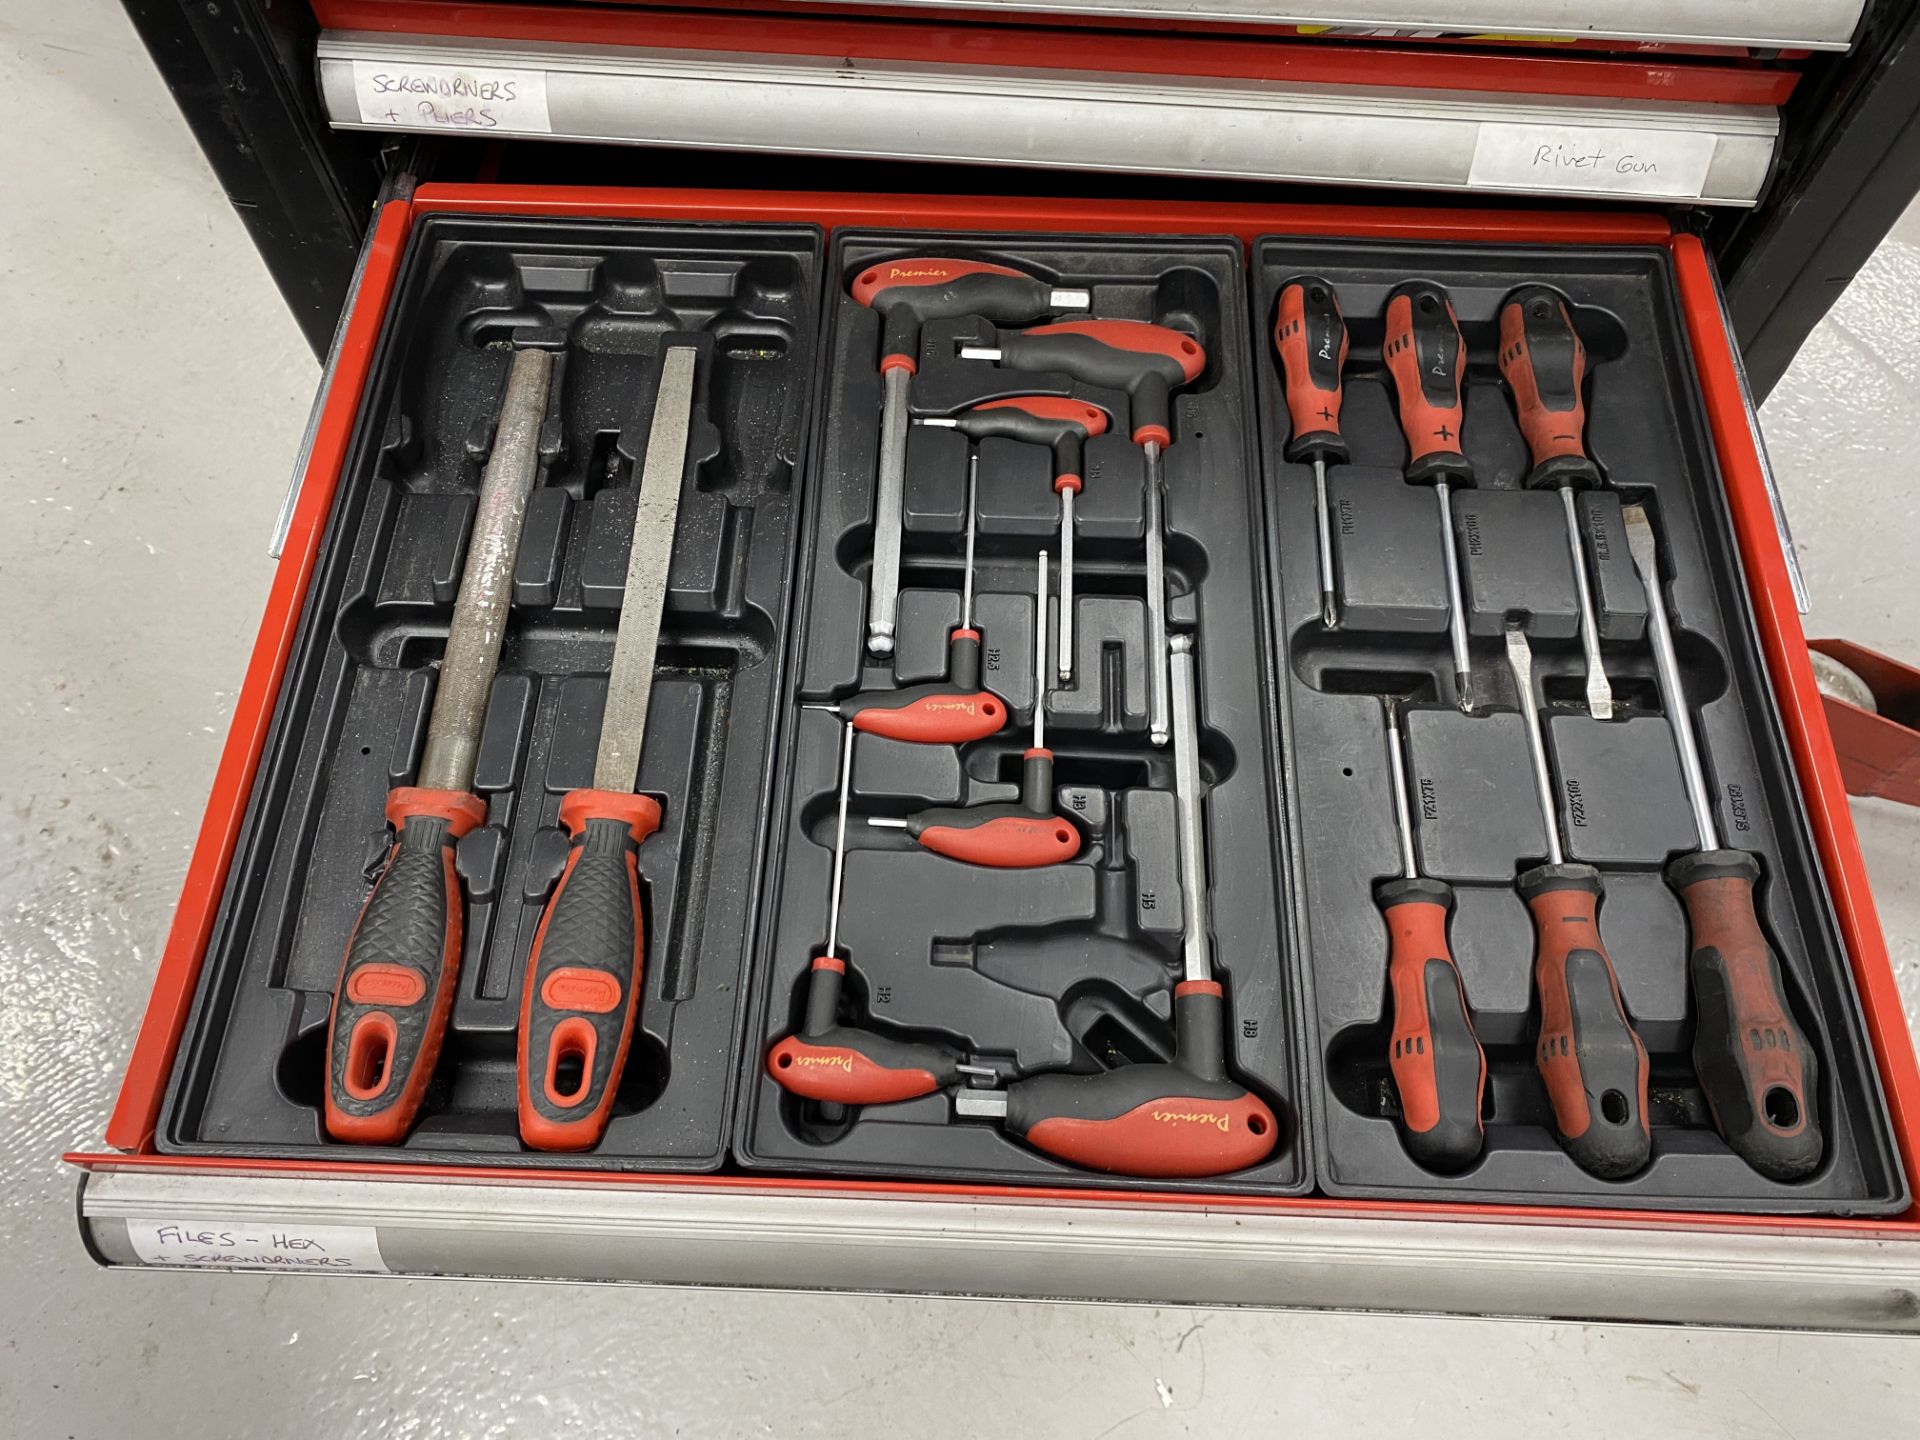 Sealey 10 drawer mobile toolbox including the following tools, rings and open ended spanners 7mm- - Image 5 of 11